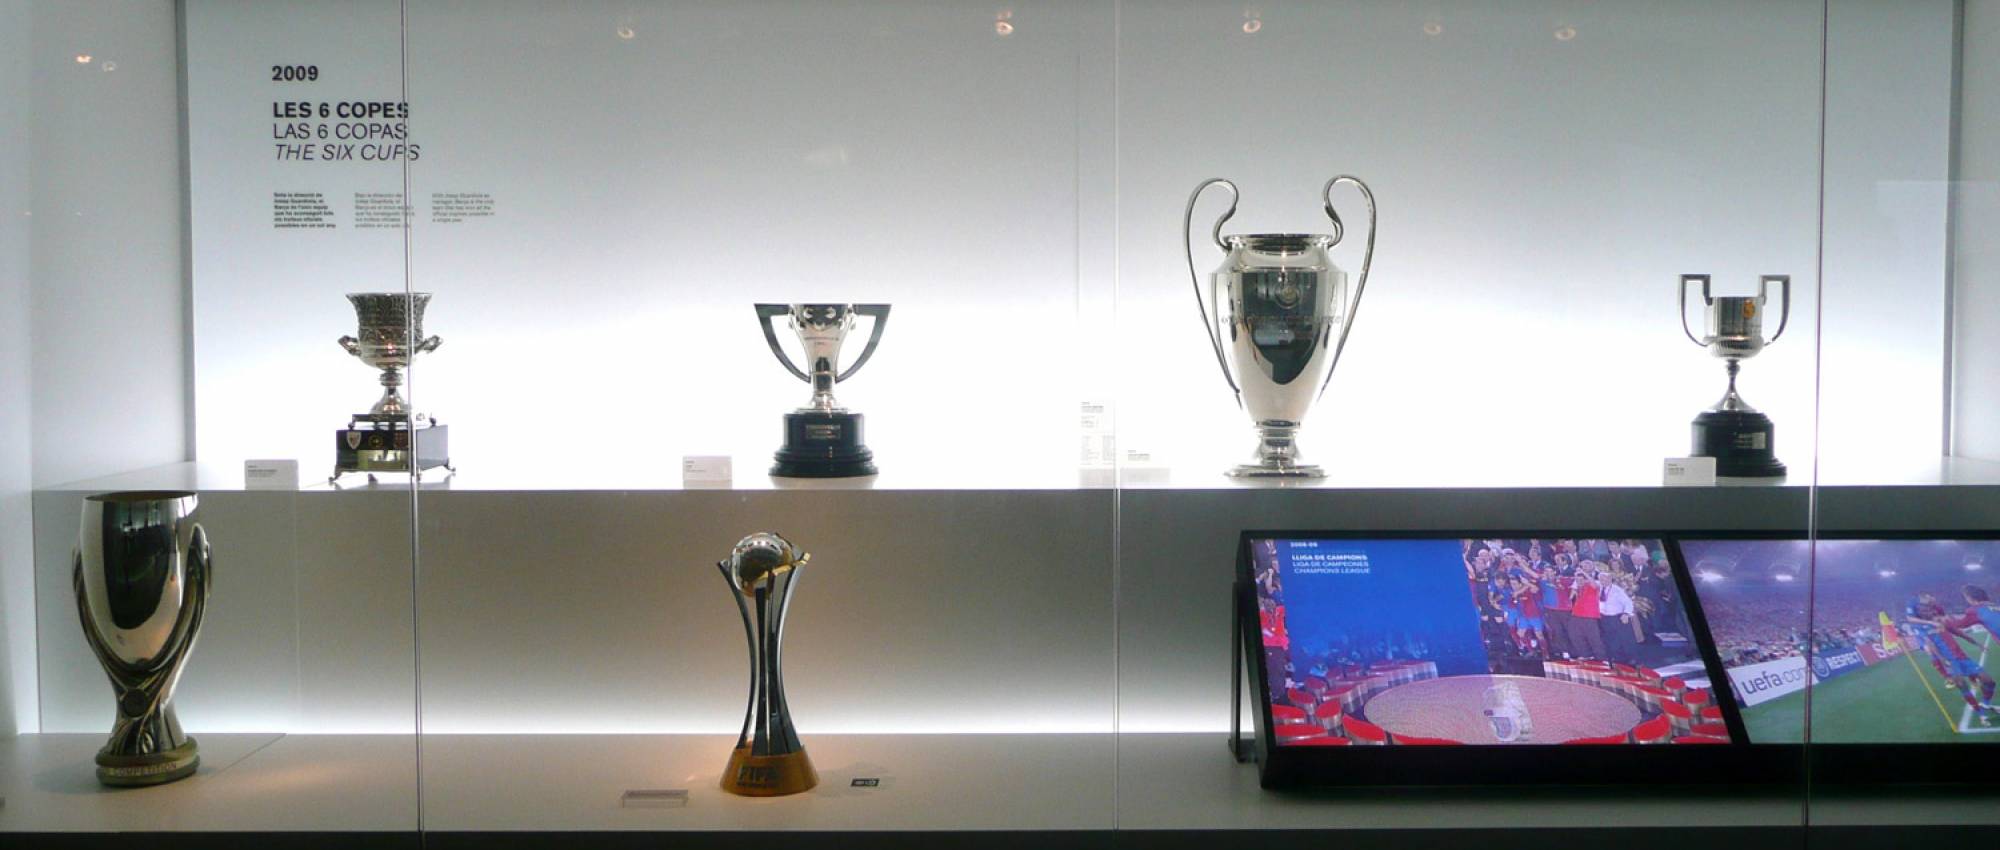 Detail of six titles won by FC Barcelona in 2009, kept at the Museum.. CC BY-ND 2.0 - Eduardo Zárate / Flickr